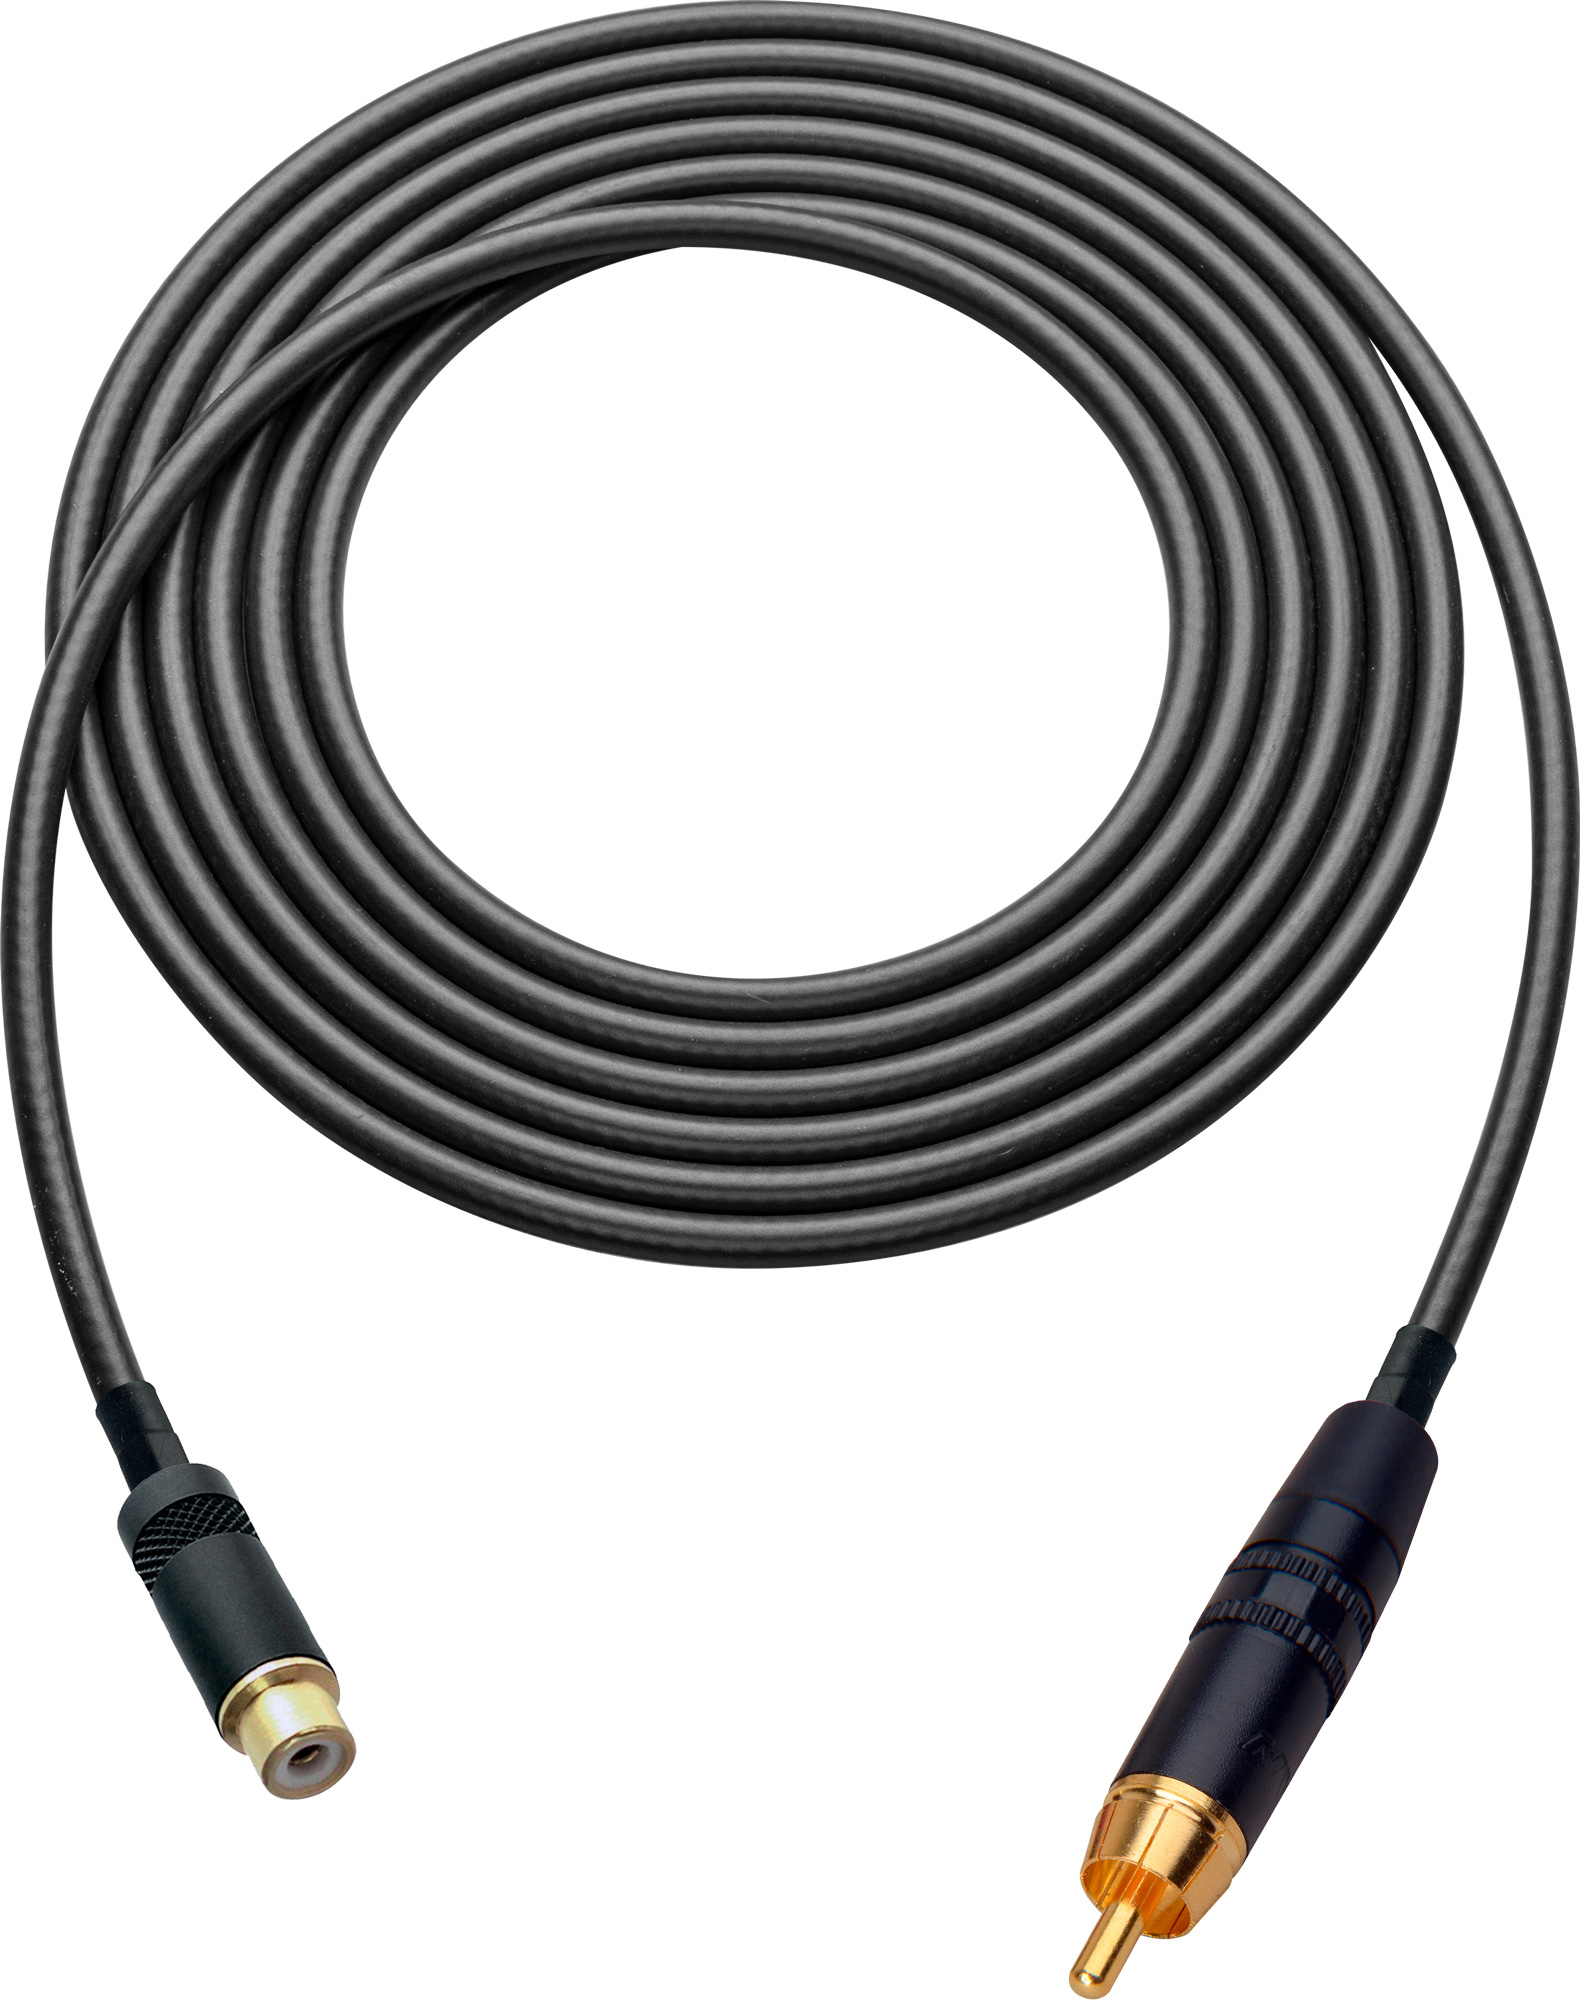 Laird HDAV-EXT-10-BK Belden 1505A RCA M to F Extension Cable For Audio or HD Video - 10 Foot Black